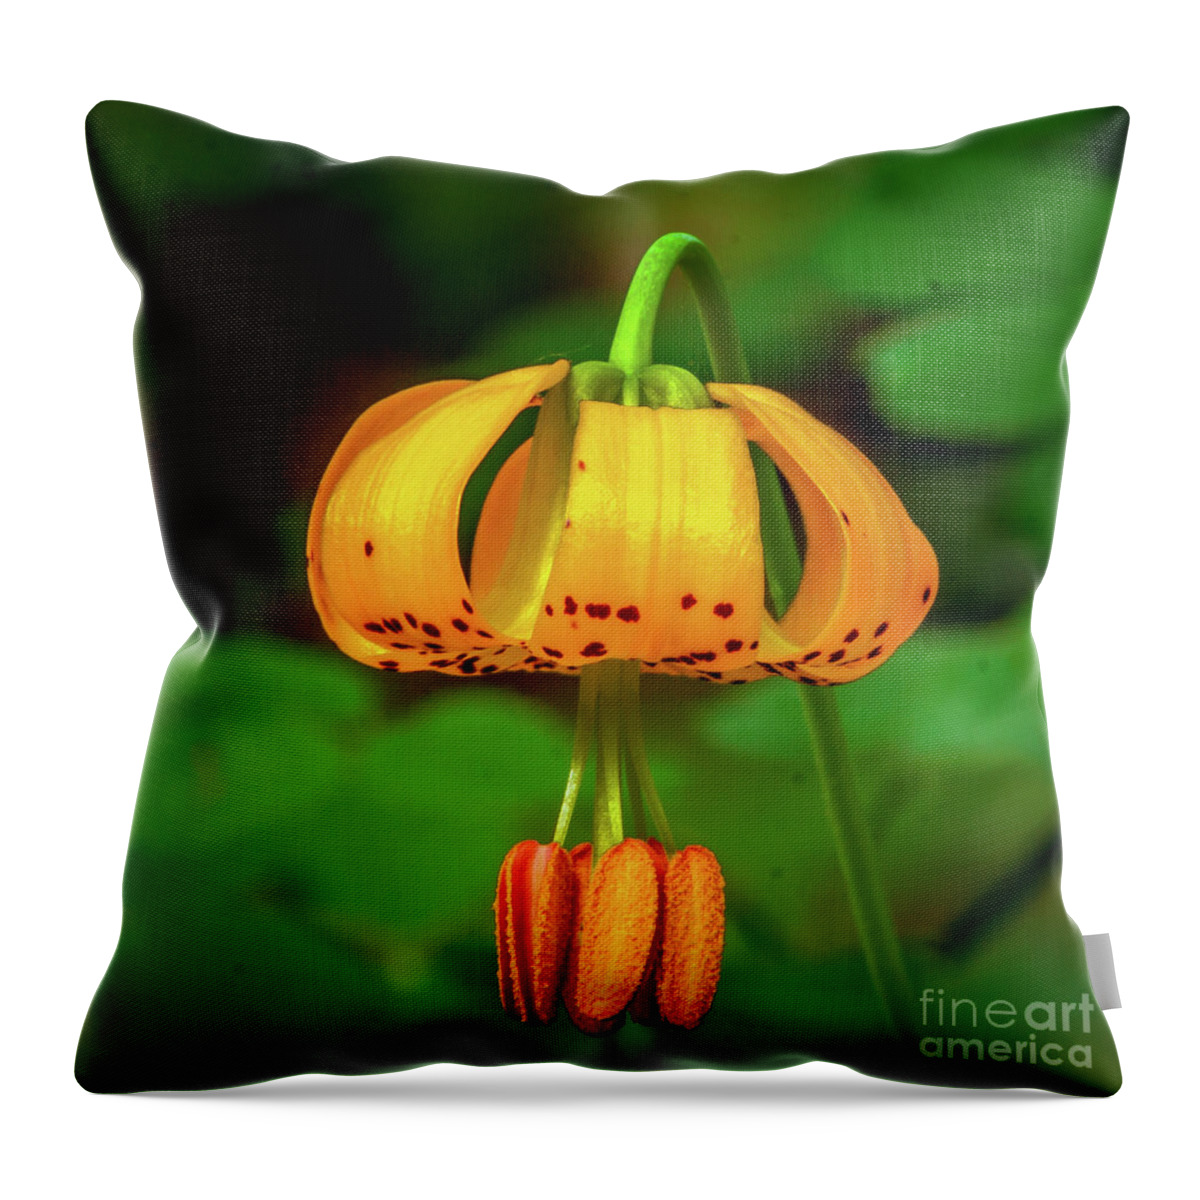 Wild Flowers Throw Pillow featuring the photograph Bright Tiger Lily Macro by Robert Bales